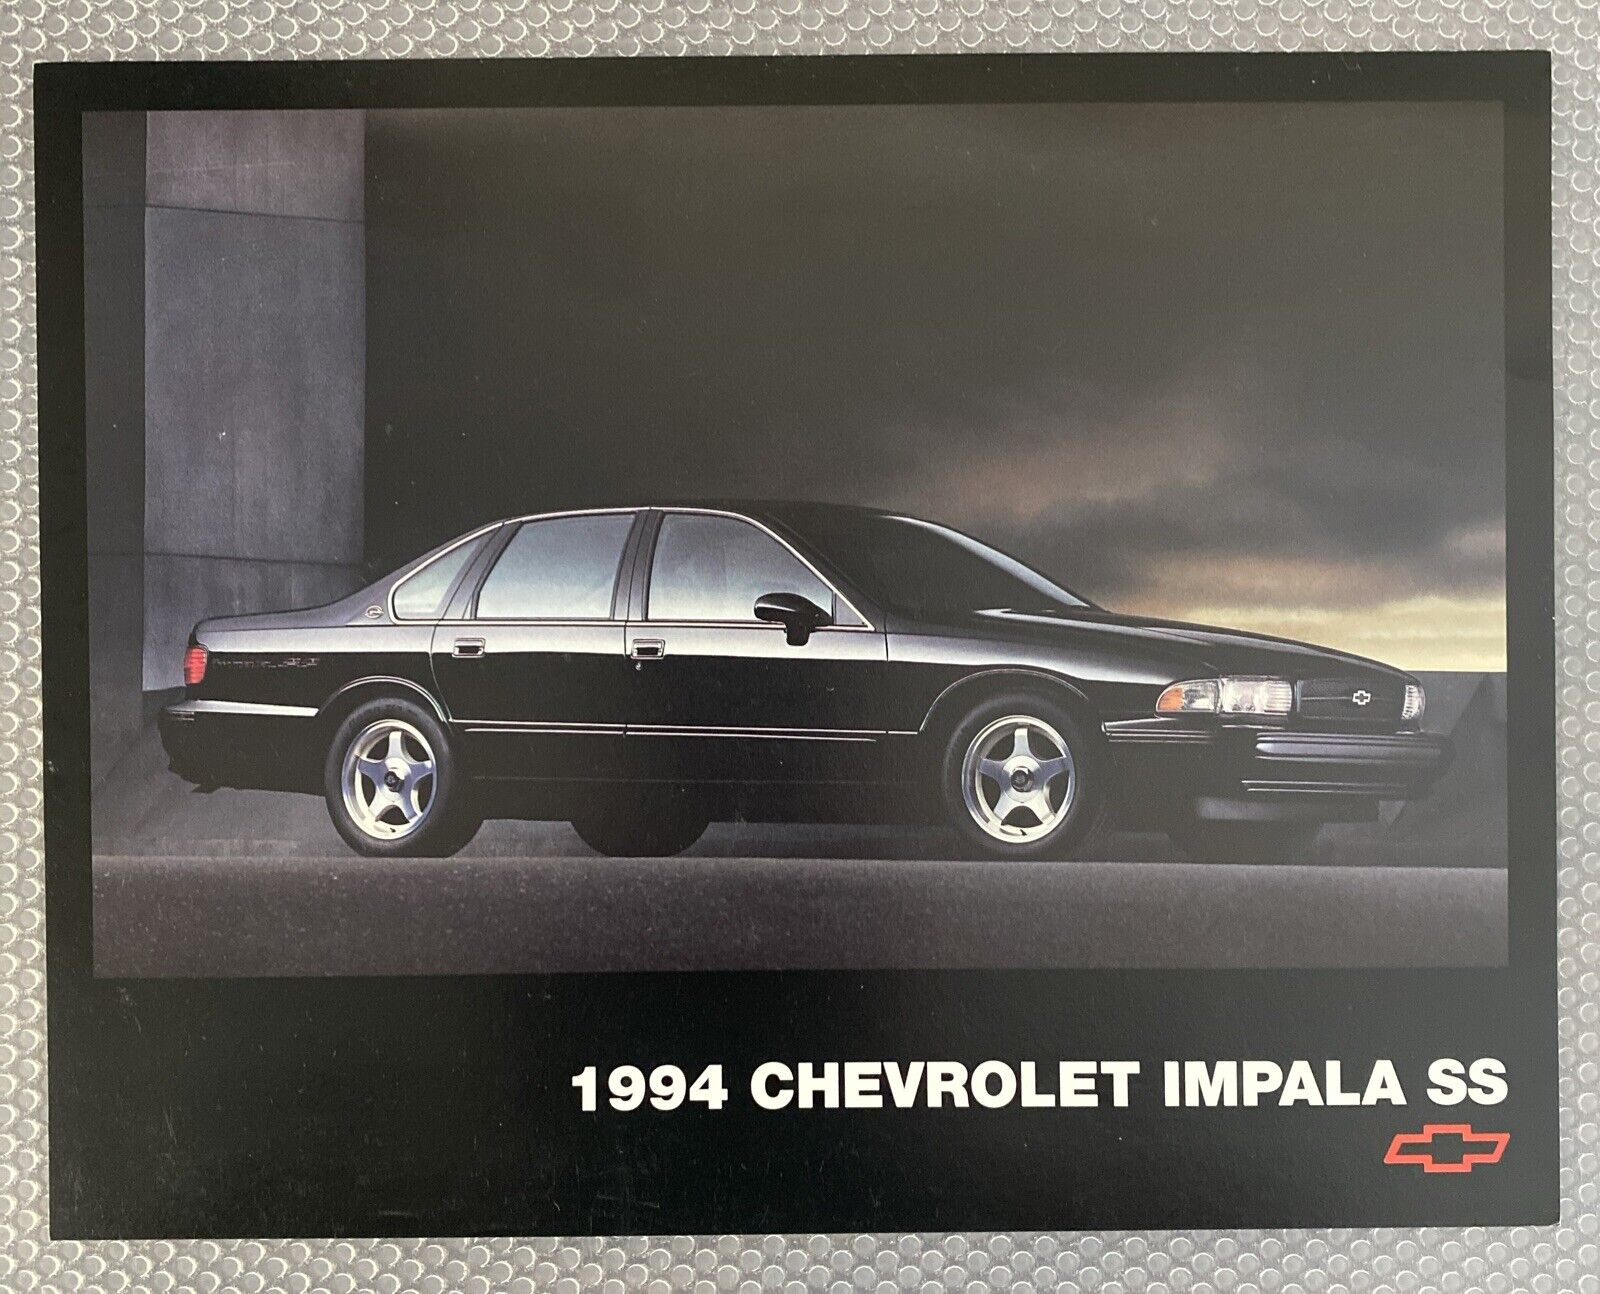 1994 Chevrolet Impala SS 2 Page Brochure Framable Picture